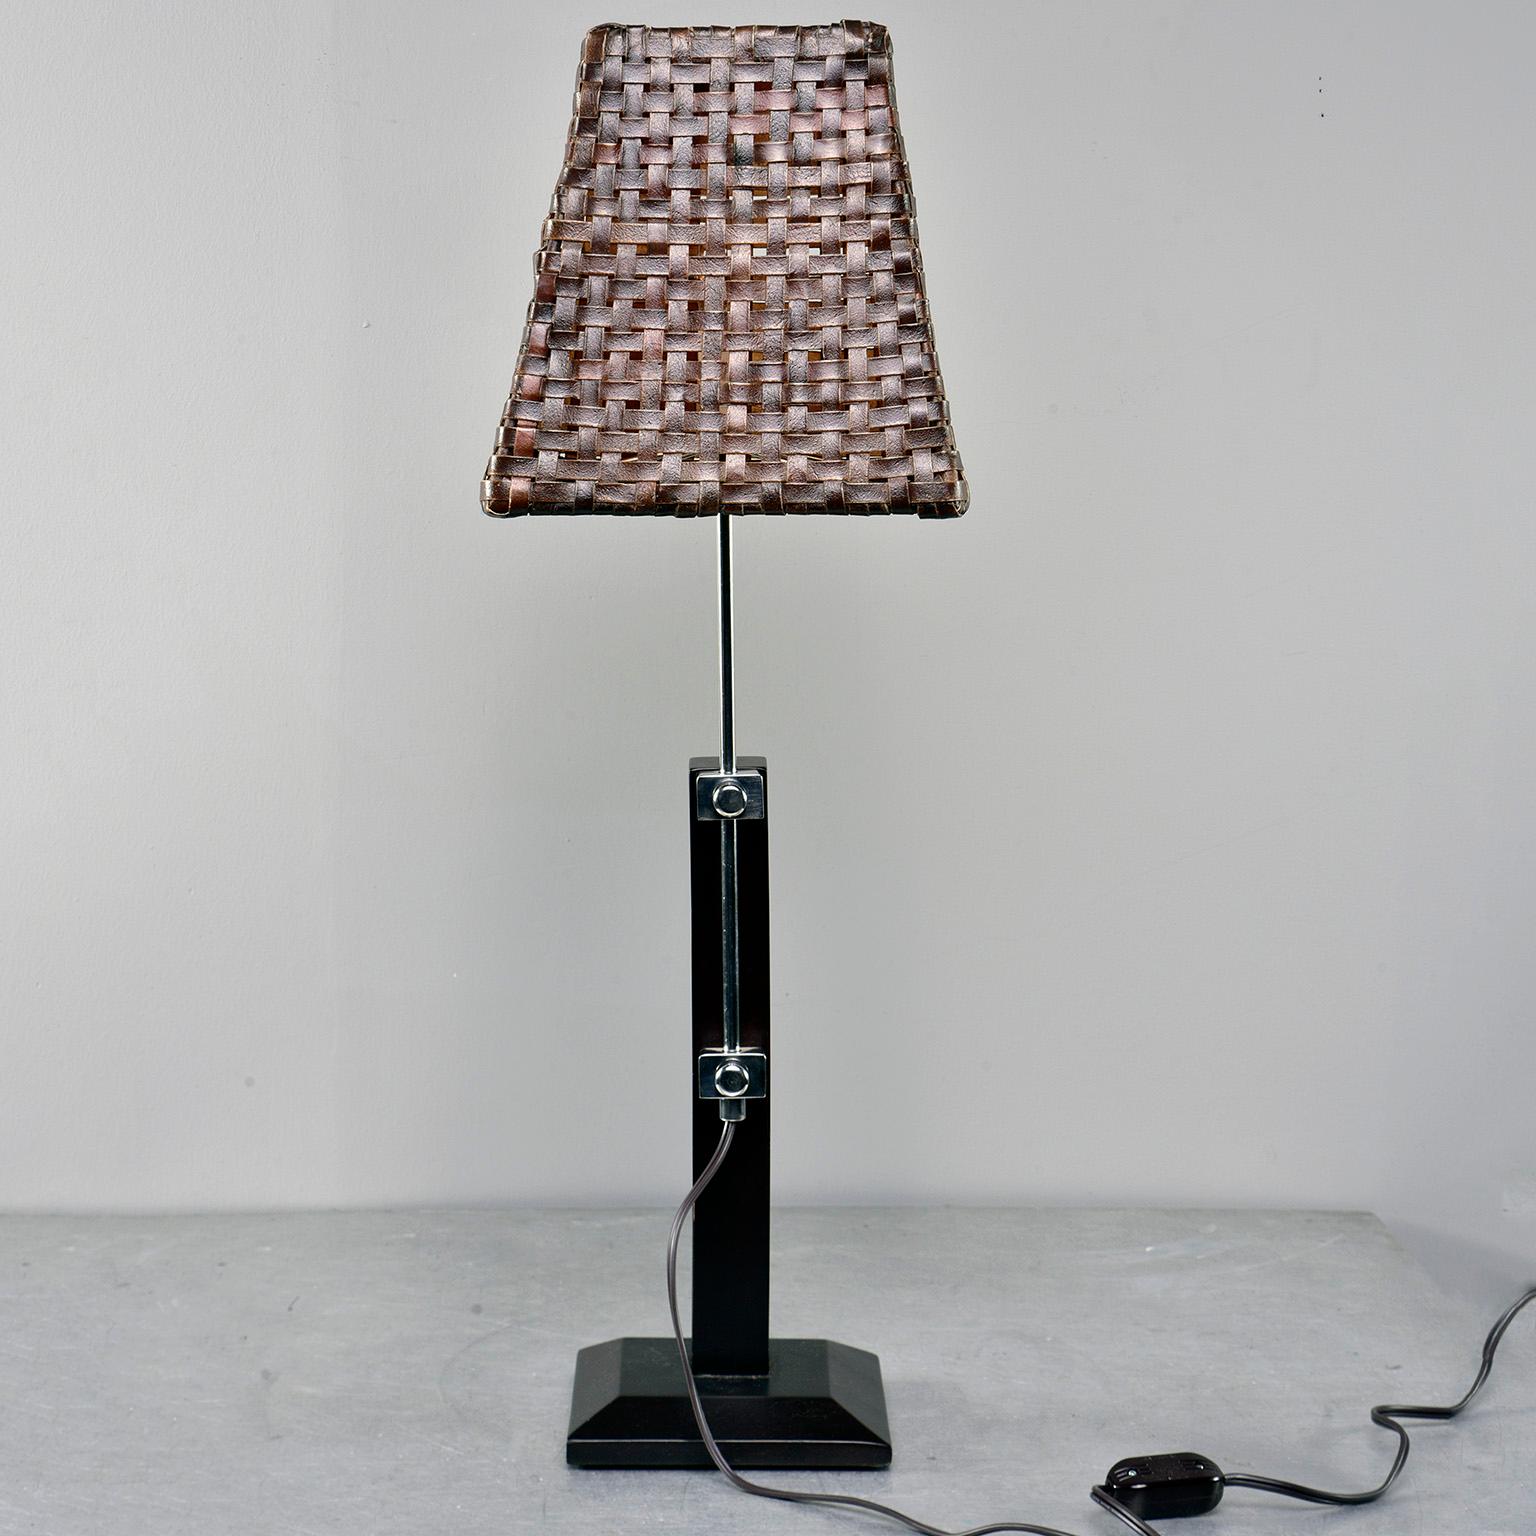 Italian table lamp has a sleek dark wood base with polished nickel adjustable support. Height can be adjusted from 31”-25”. Single candelabra sized socket. Original hand woven leather shade. Electrical has been updated for US standards. Rocker